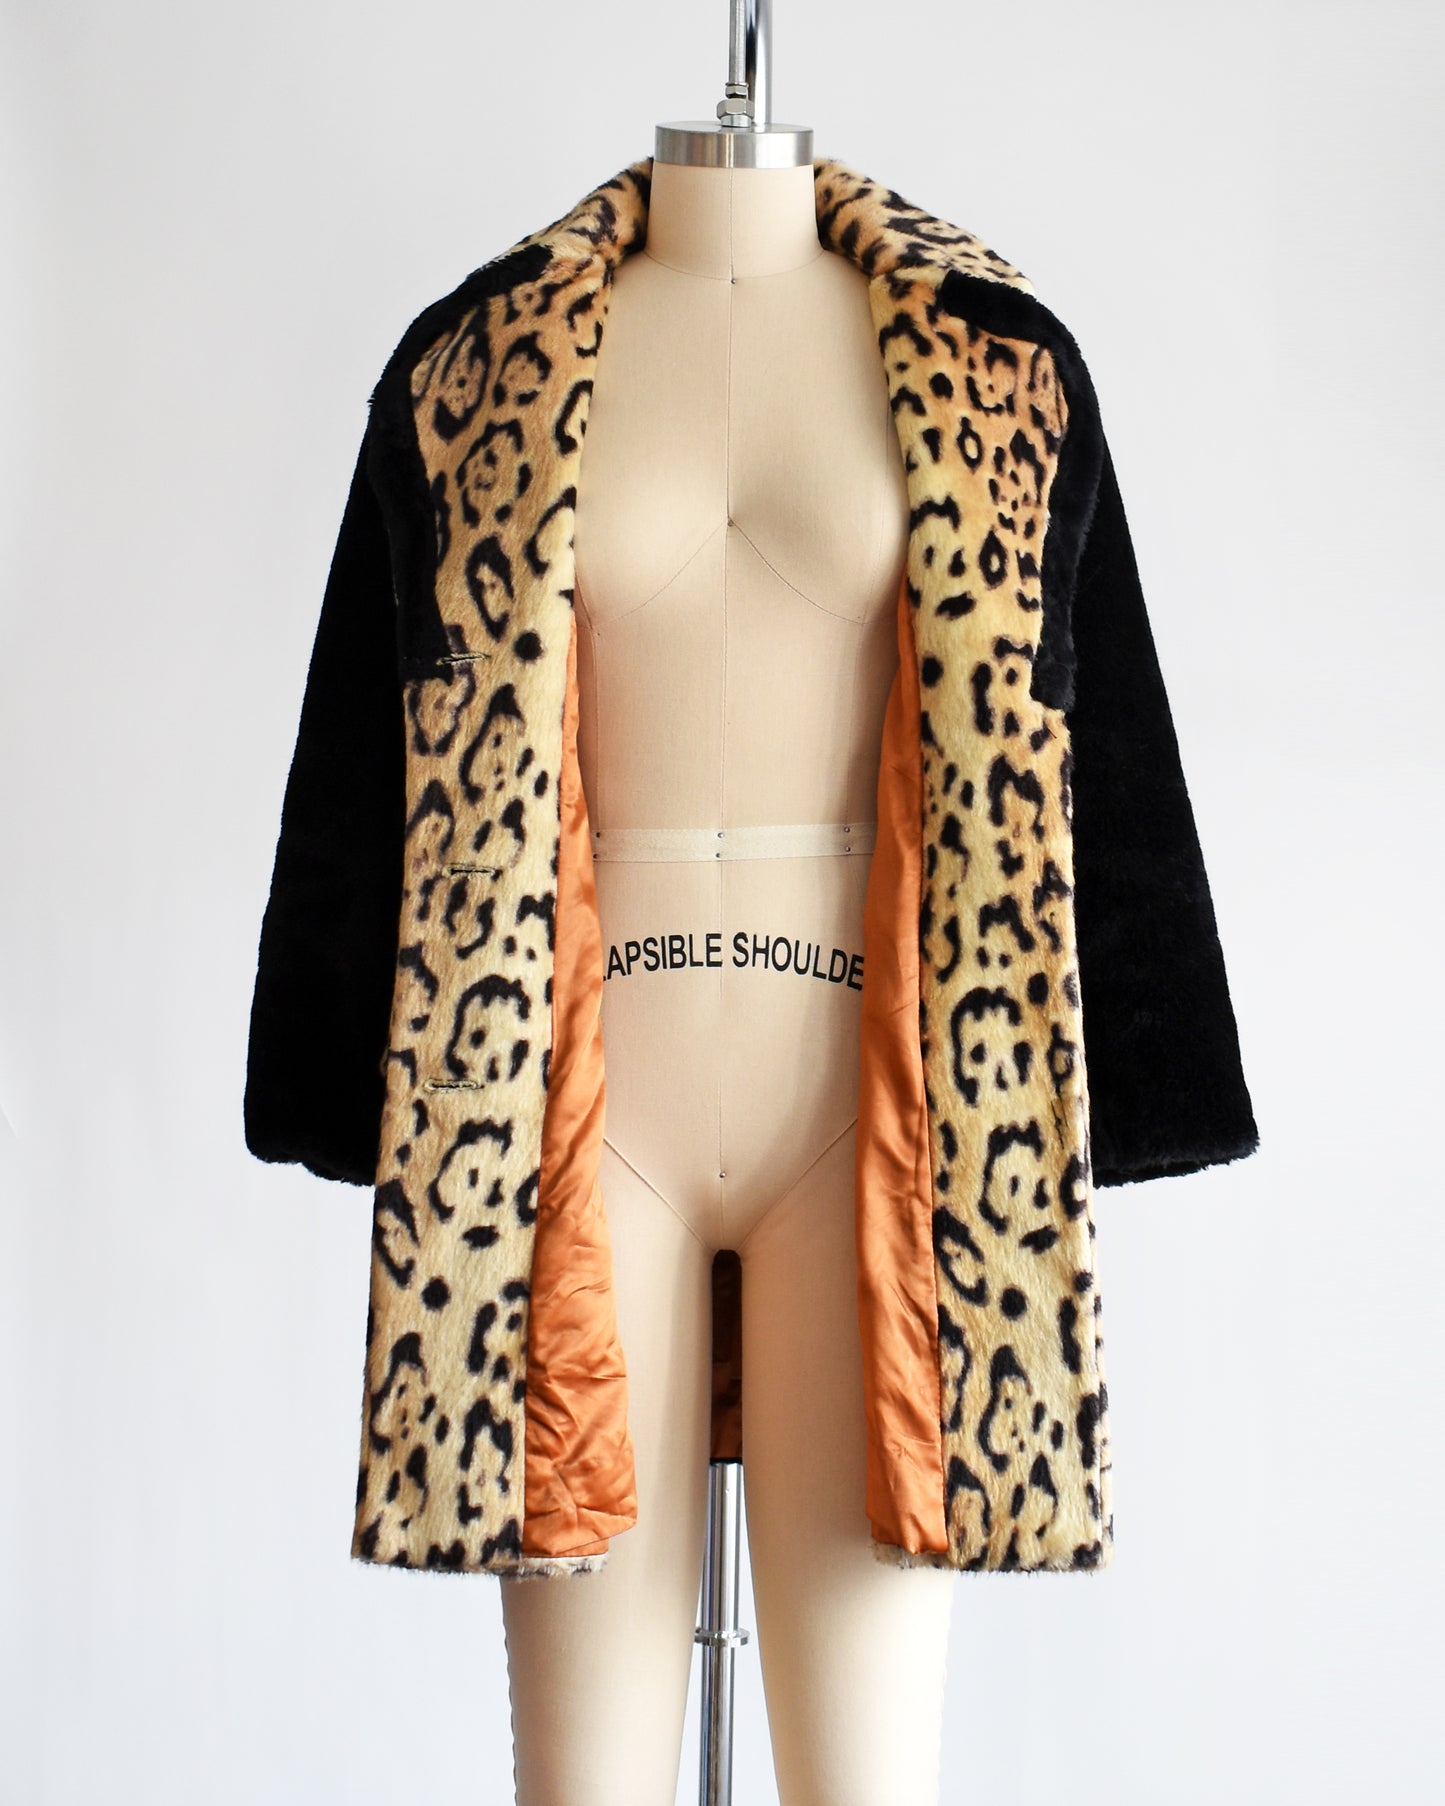 A vintage late 1960s early 1970s leopard faux fur coat that has large leopard print on the collar, down the front, and on the large side pockets. Black plush long sleeves, sides, and back. Matching black trim on the collar. The coat is opened showing the orange lining.